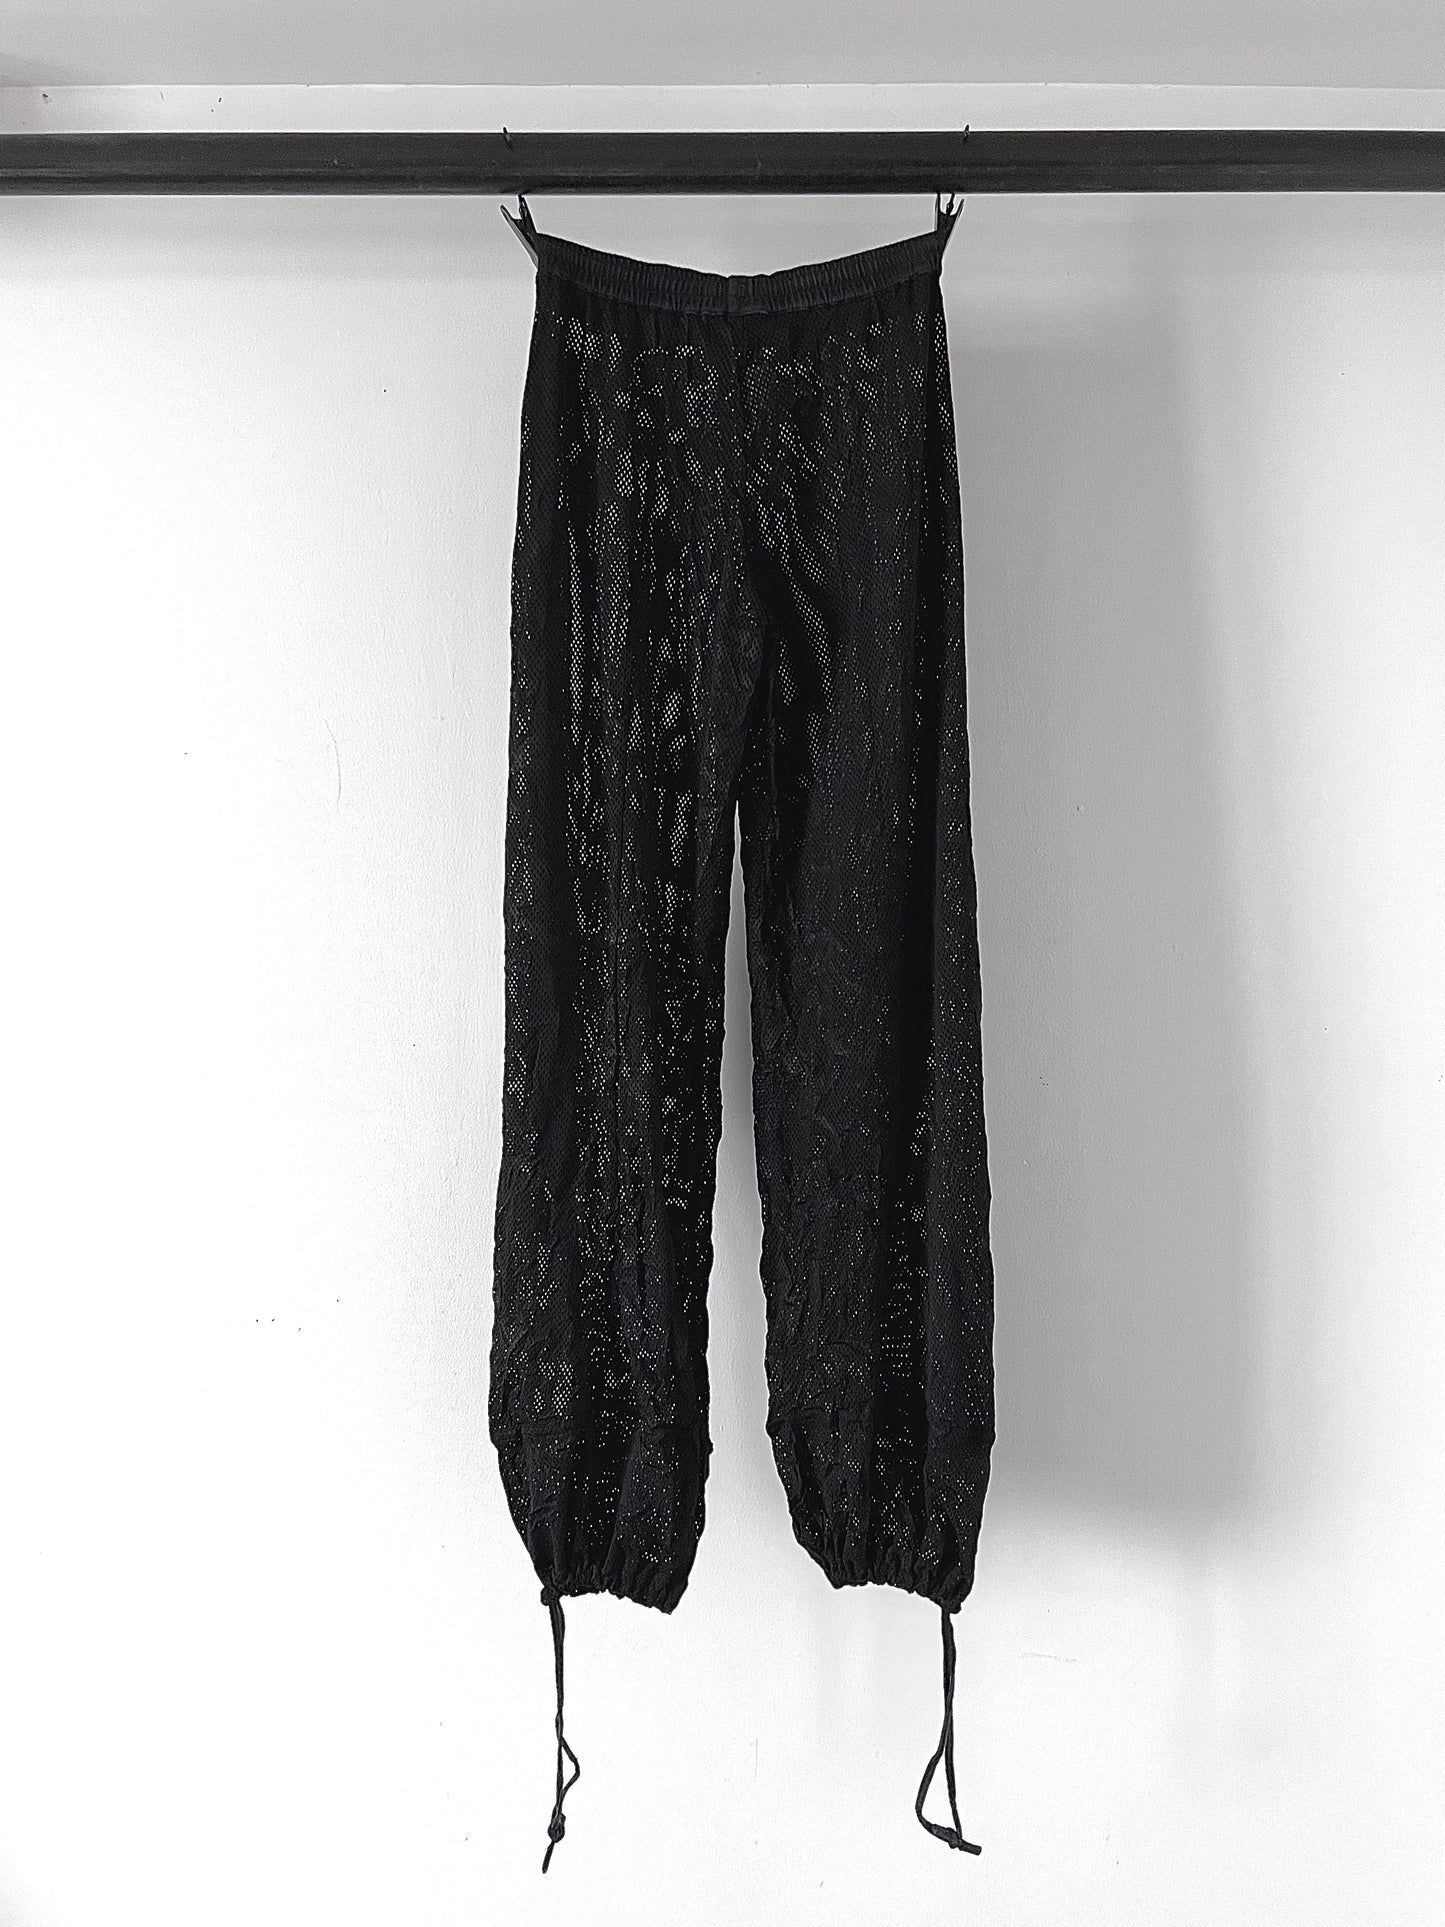 Marithe + Francois Girbaud Perforated Pants